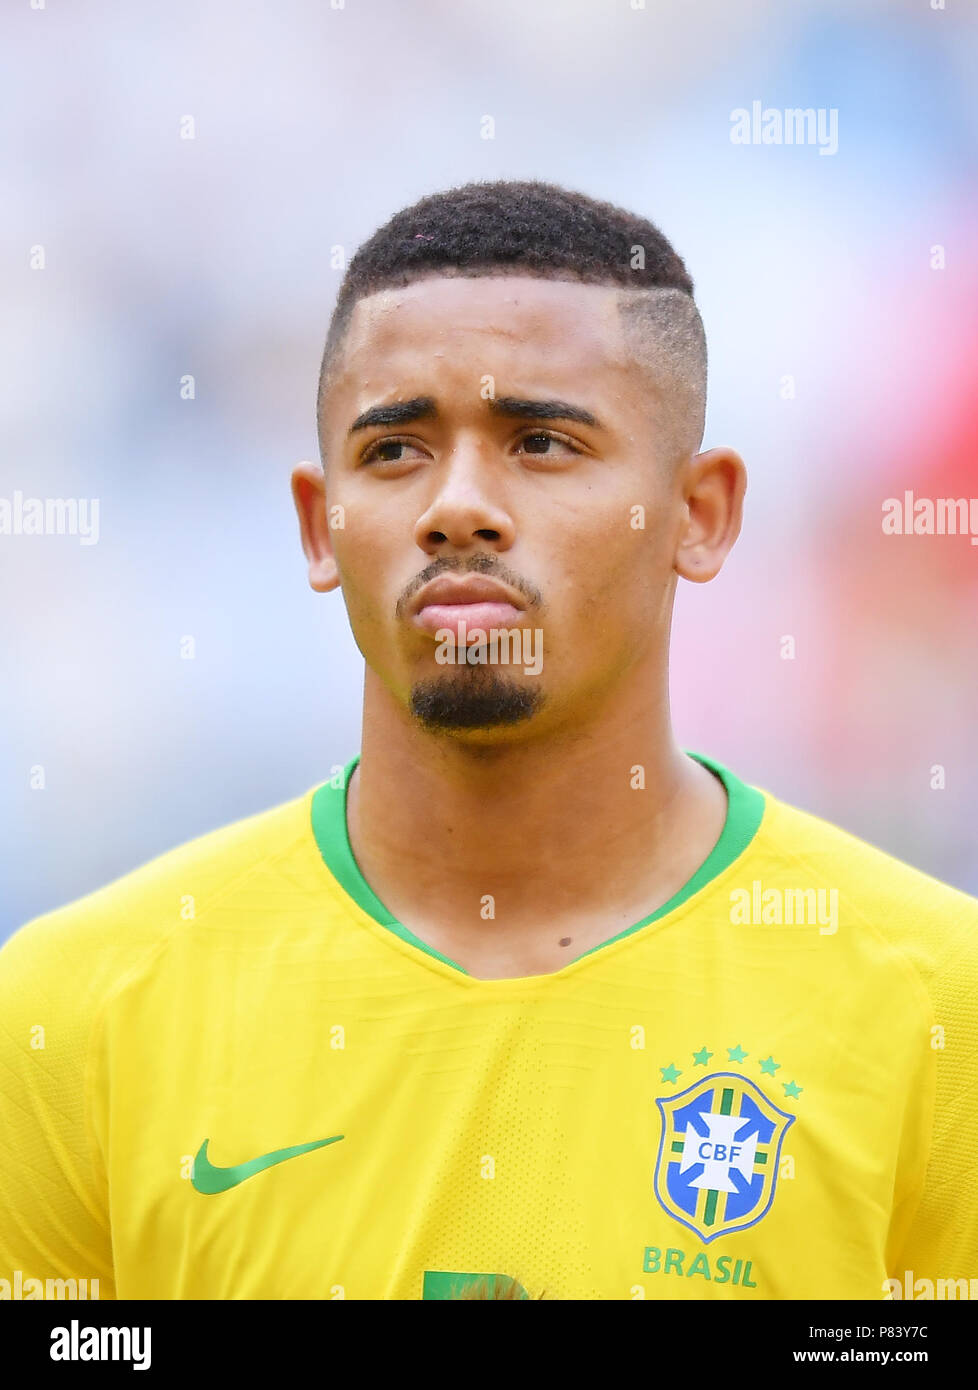 SAMARA, RUSSIA - JULY 02: Gabriel Jesus of Brazil during the 2018 FIFA World Cup Russia Round of 16 match between Brazil and Mexico at Samara Arena on July 2, 2018 in Samara, Russia. (Photo by Lukasz Laskowski/PressFocus/MB Media) Stock Photo